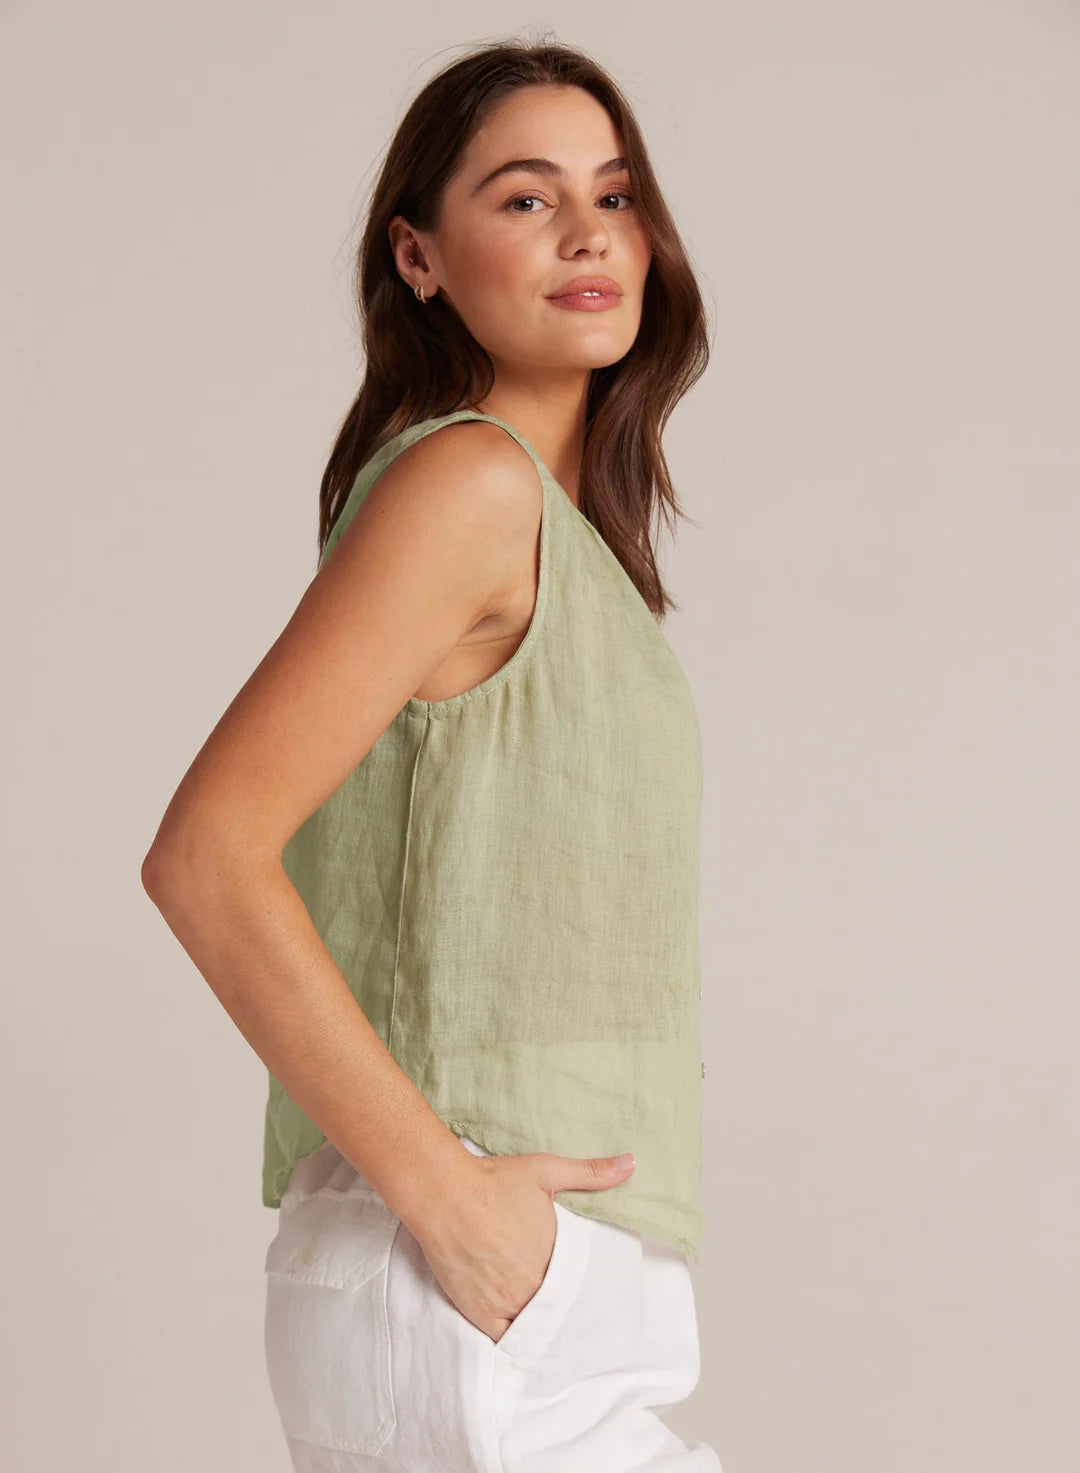 SLEEVELESS SHIRRED SHOULDER BLOUSE IN PALE PALM - Romi Boutique